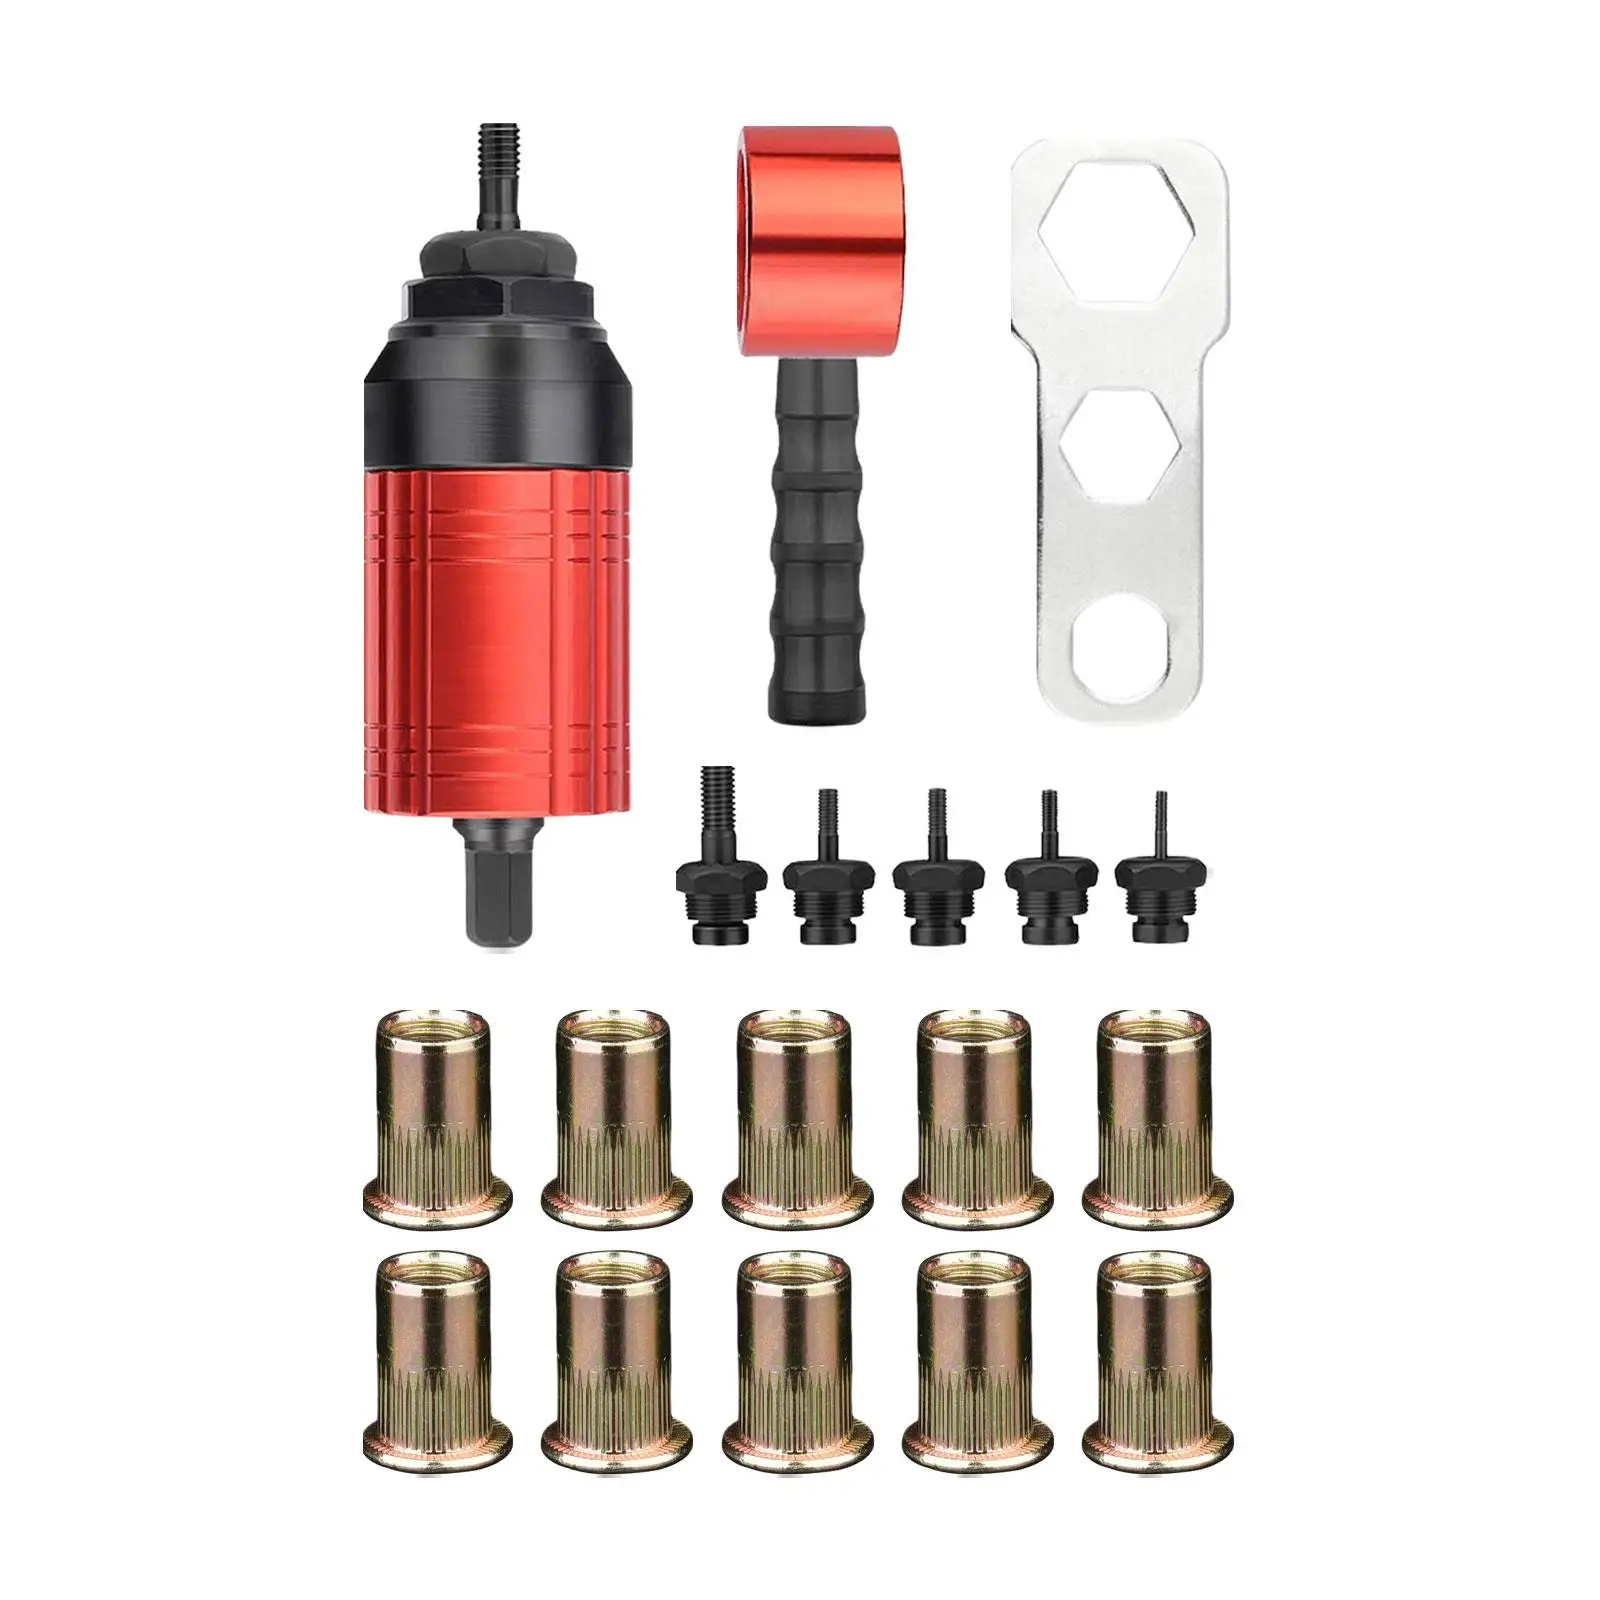 Rivet Nut Drill Adaptor Attachment Riveting Tools Threaded Insert for Furniture Electrical Appliance Architecture Repair Car